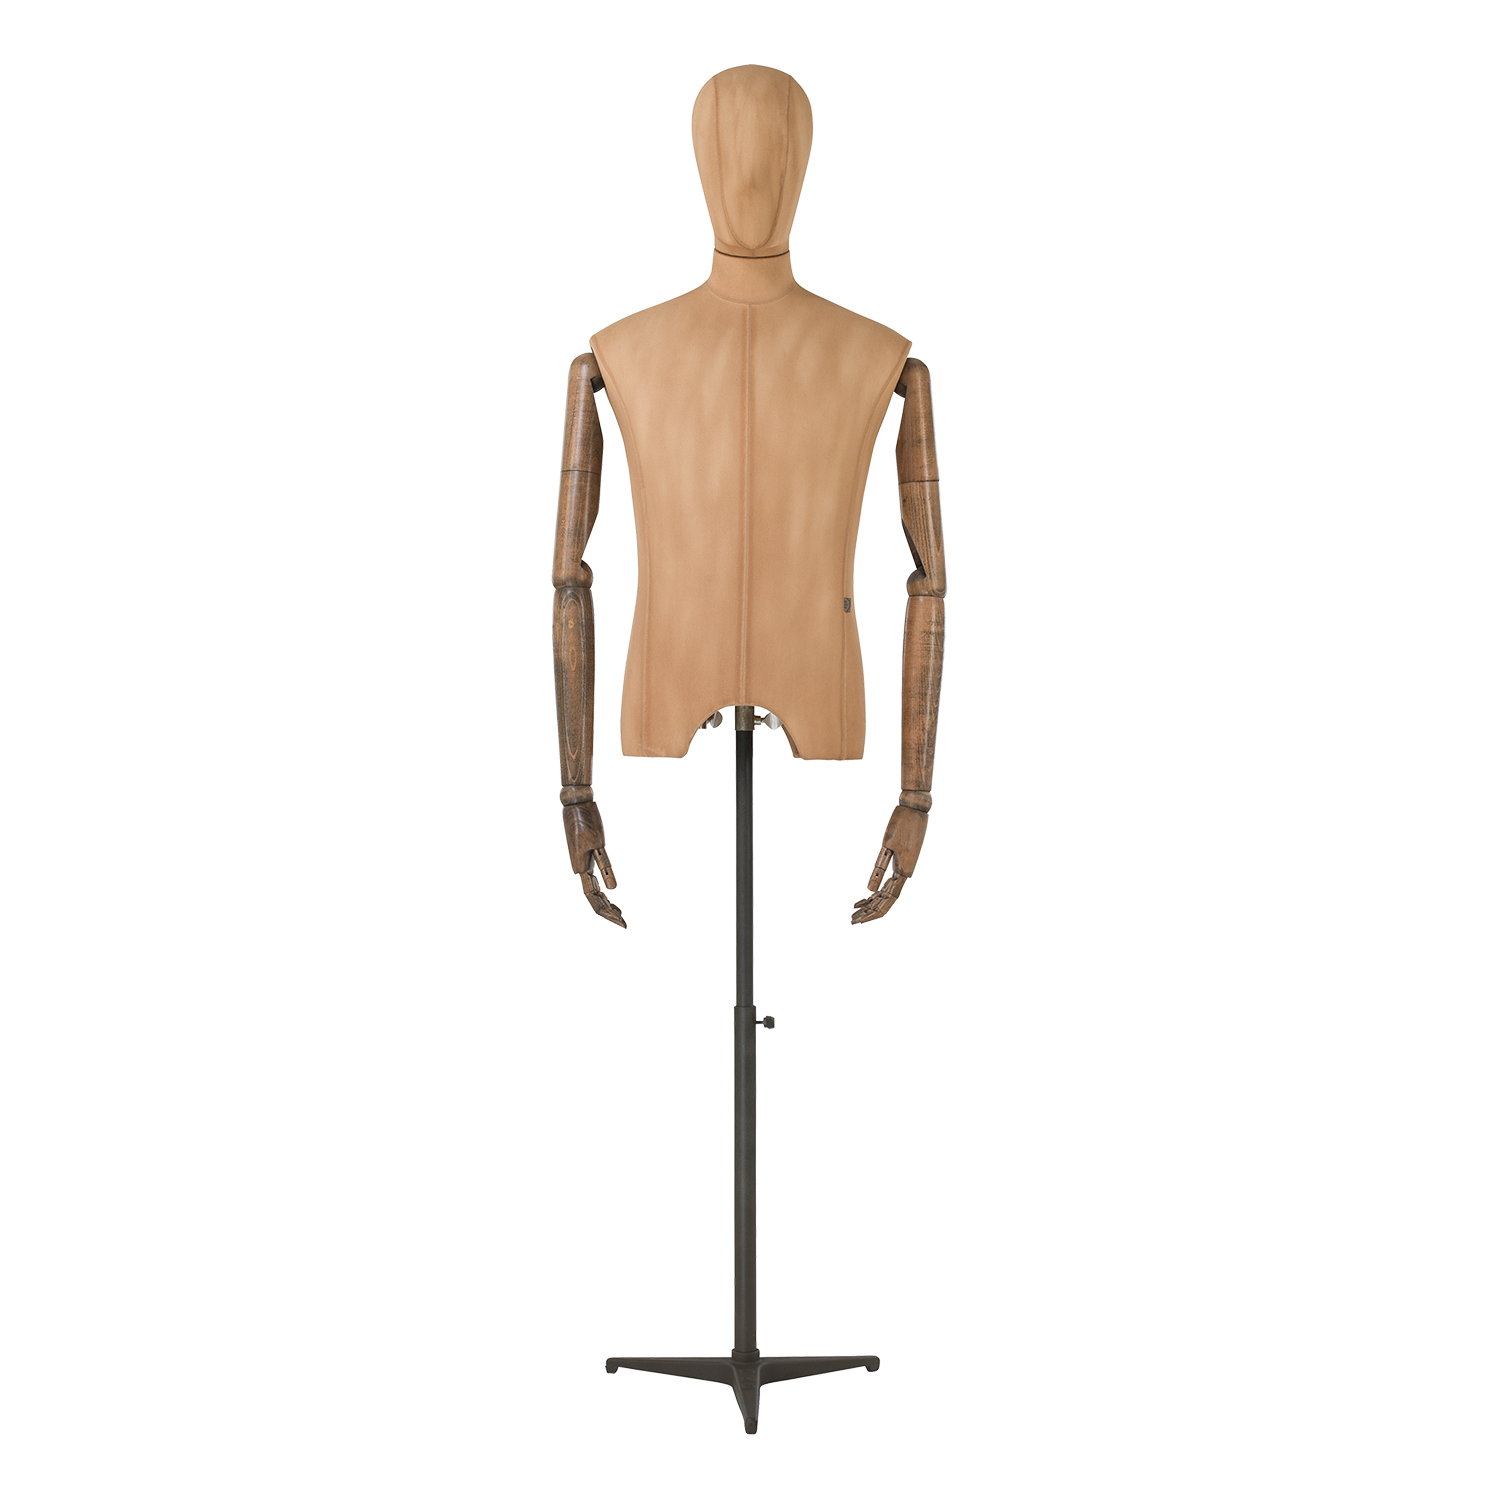 Male Articulated Mannequin Download Free PNG